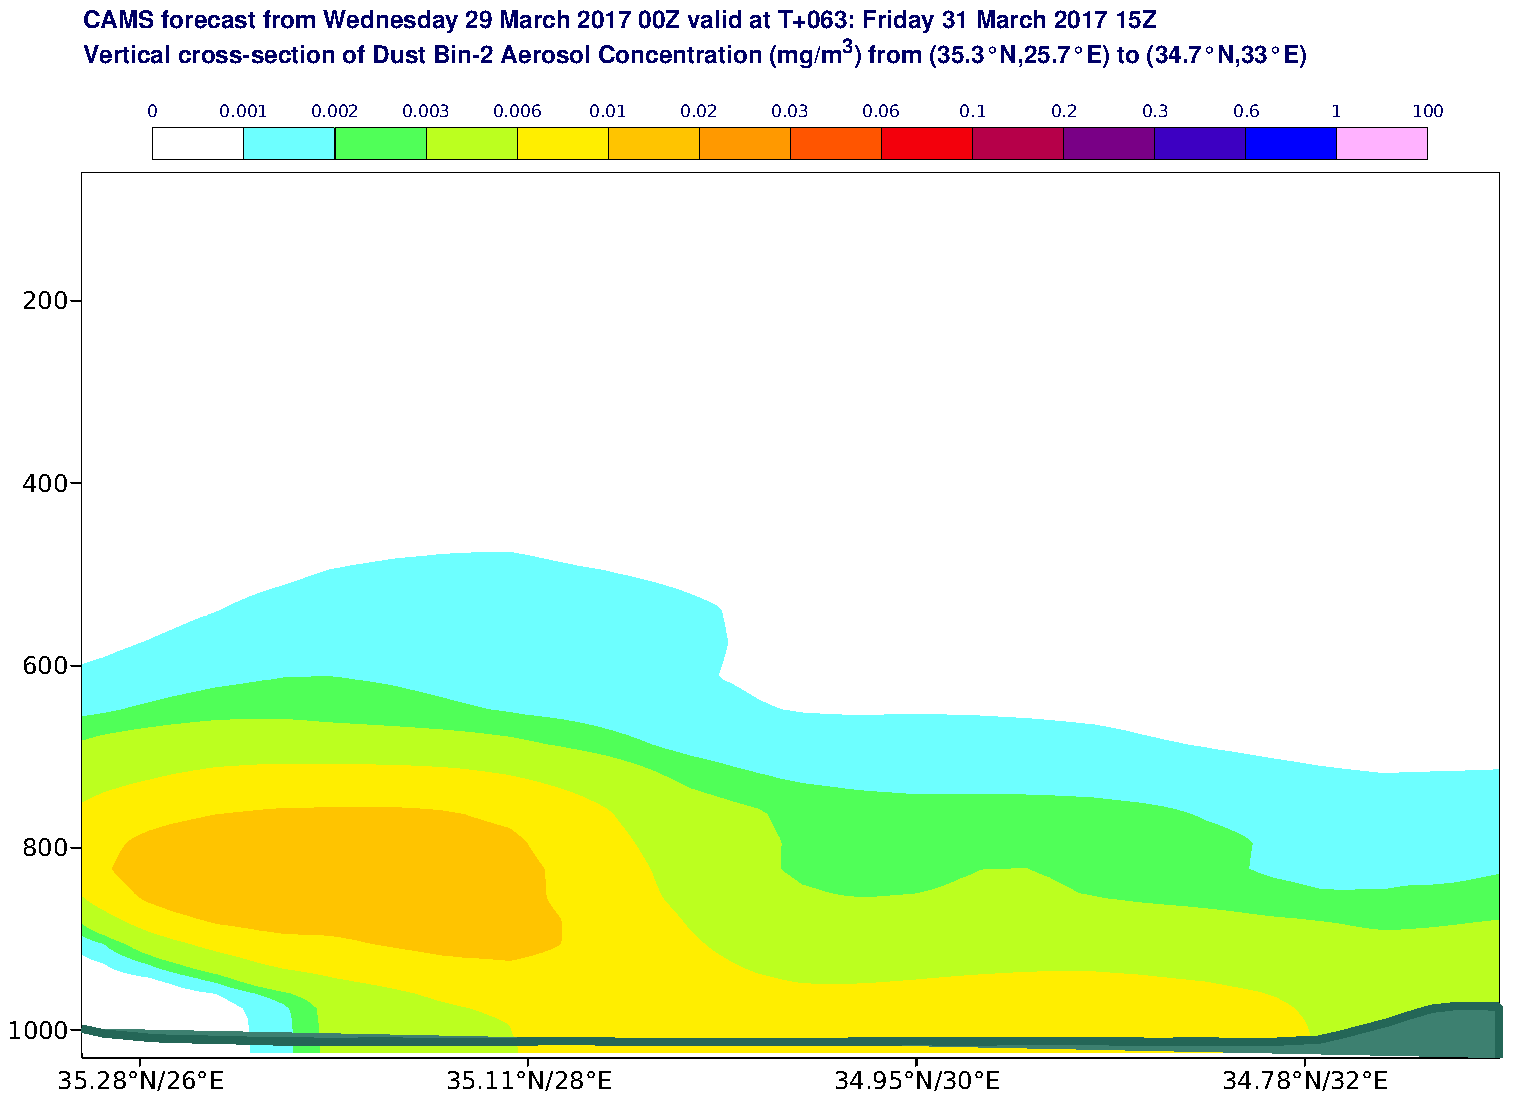 Vertical cross-section of Dust Bin-2 Aerosol Concentration (mg/m3) valid at T63 - 2017-03-31 15:00